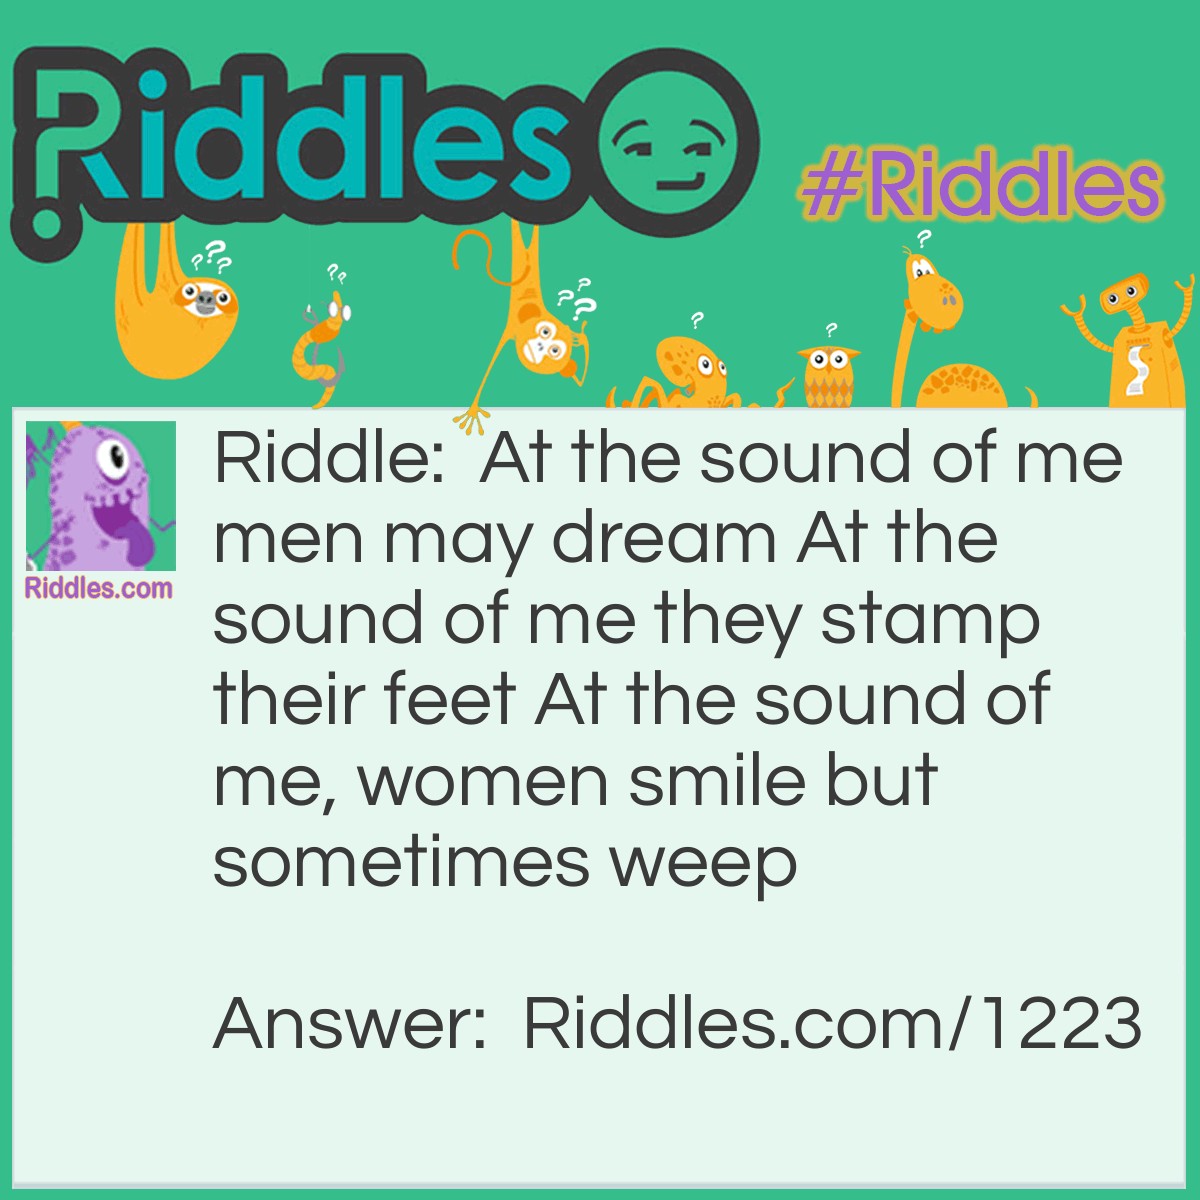 Riddle: At the sound of me, men may dream. At the sound of me, they stamp their feet. At the sound of me, women smile but sometimes weep. What am I? Answer: Music.